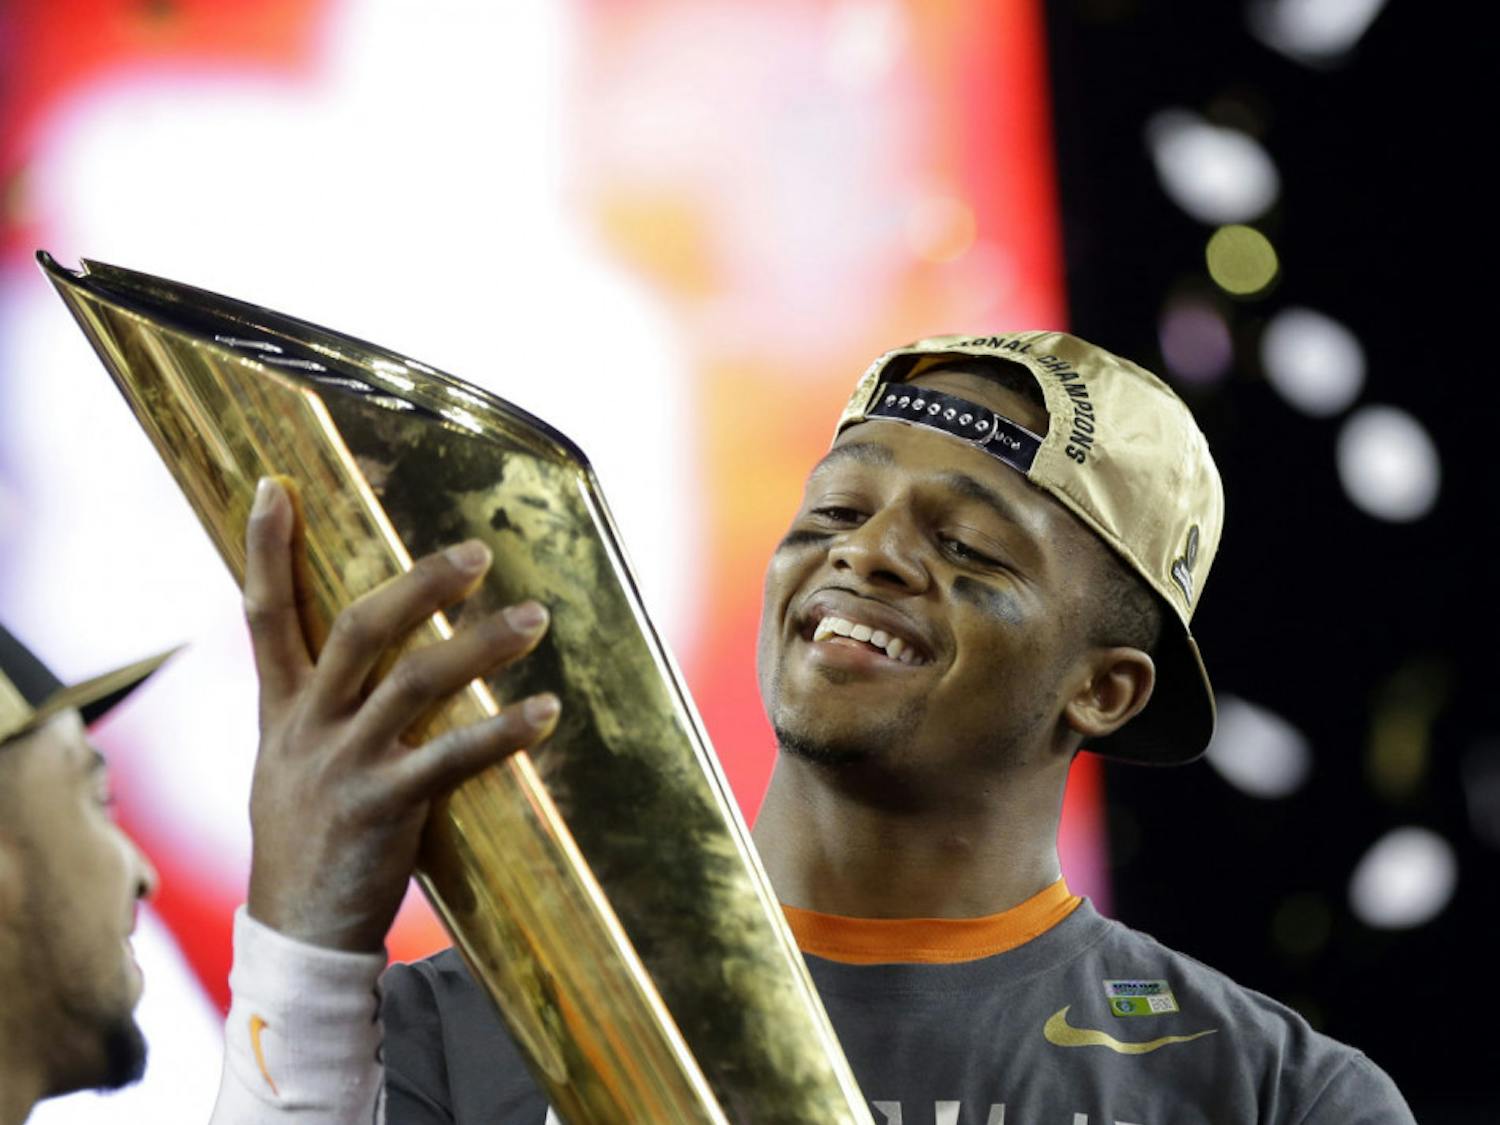 Clemson's Deshaun Watson holds up the championship trophy after the NCAA college football playoff championship game against Alabama Tuesday, Jan. 10, 2017, in Tampa, Fla. Clemson won 35-31. (AP Photo/David J. Phillip)